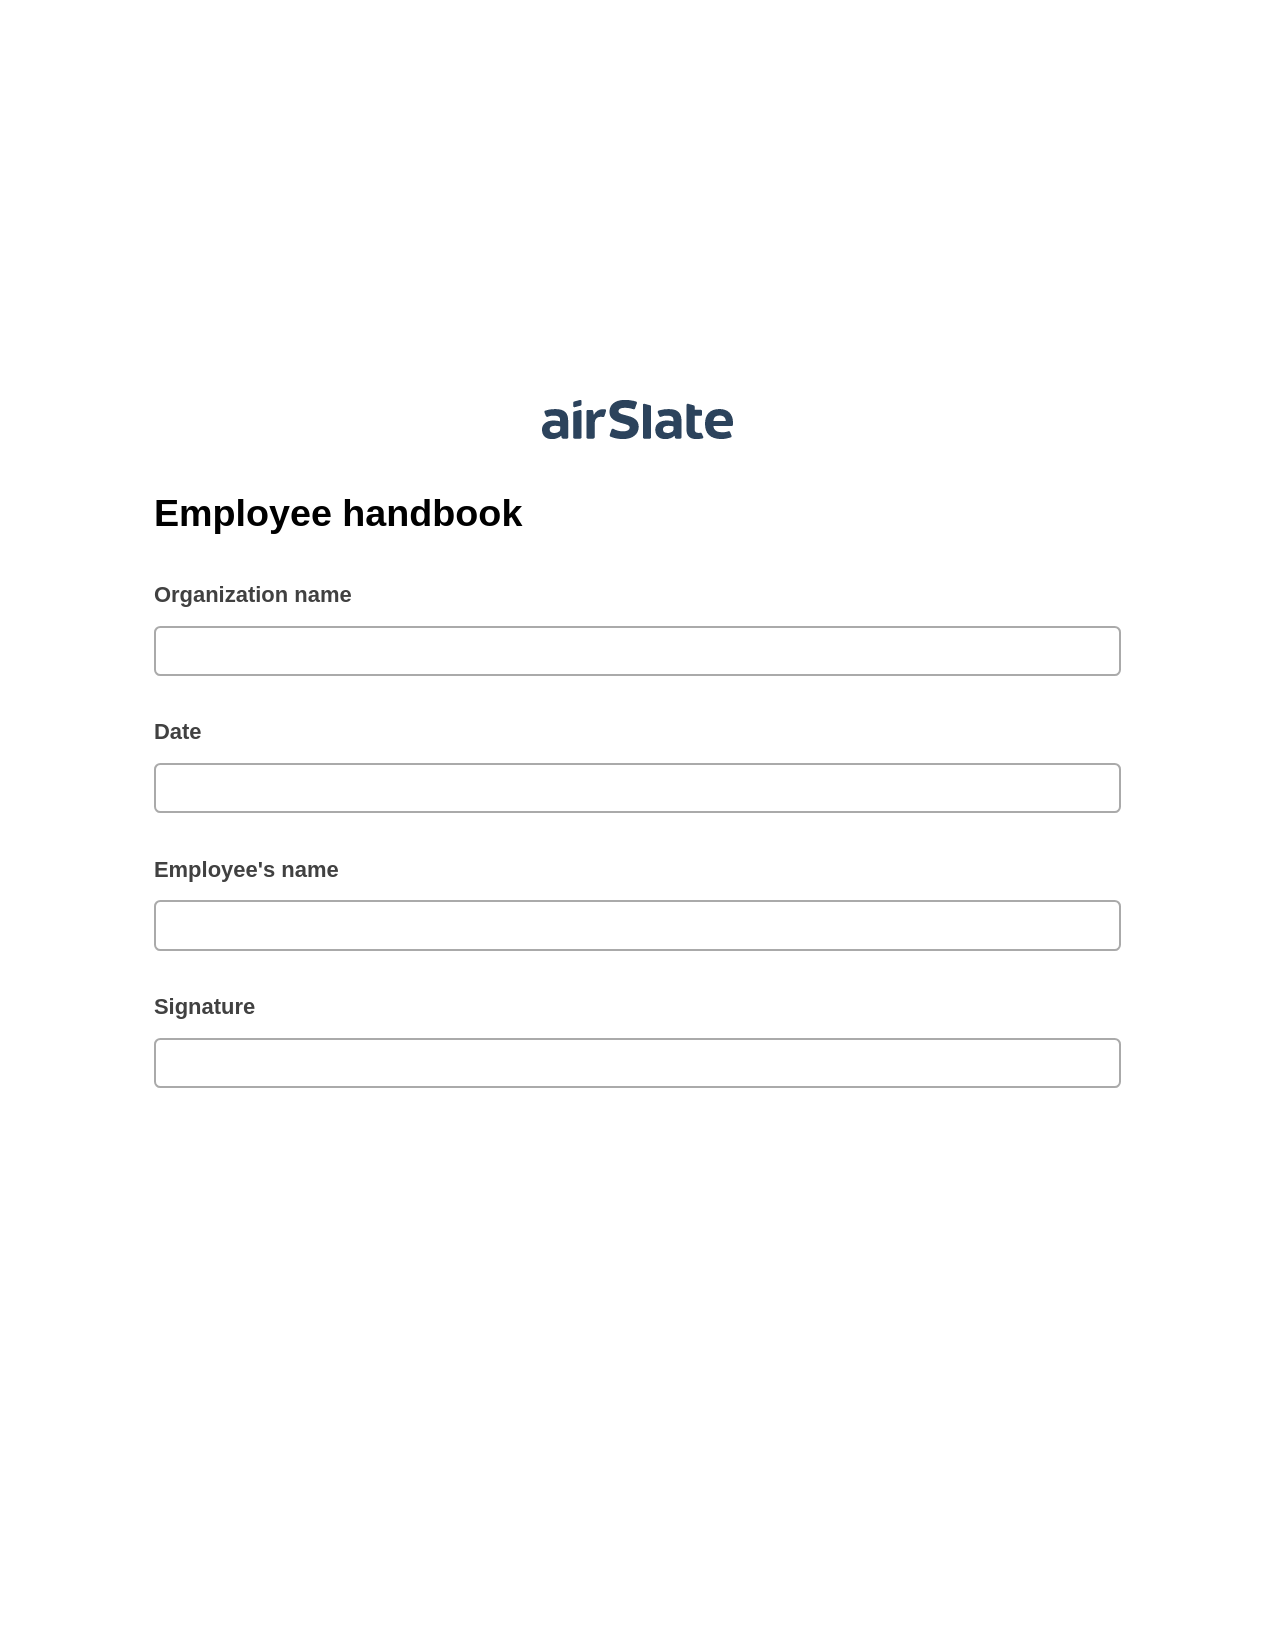 Employee handbook Pre-fill from CSV File Bot, Create slate addon, Export to NetSuite Record Bot